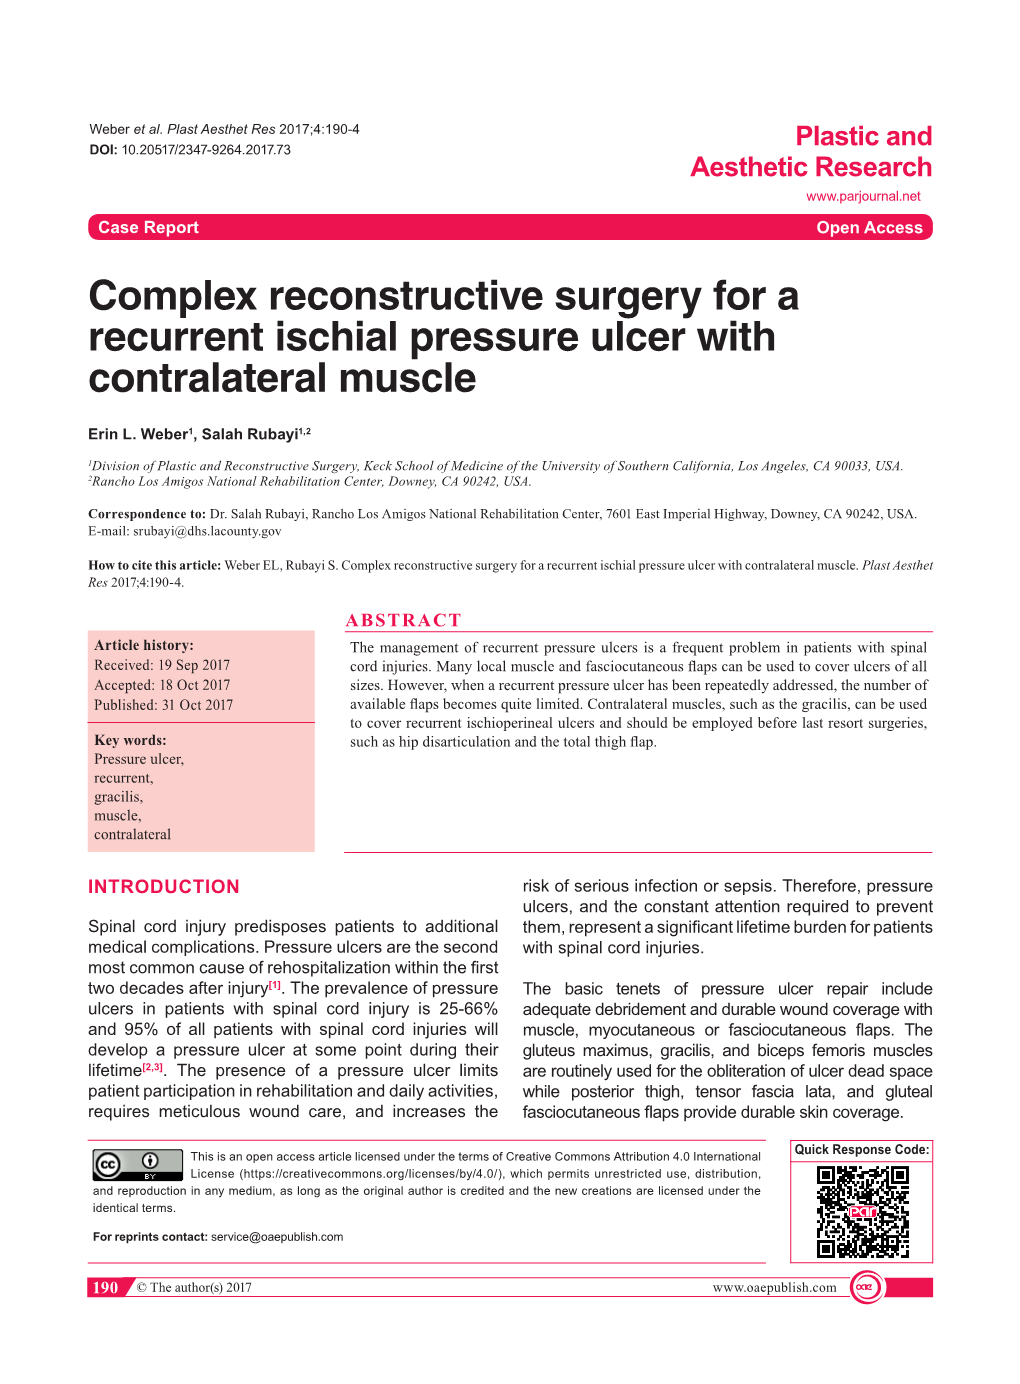 Complex Reconstructive Surgery for a Recurrent Ischial Pressure Ulcer with Contralateral Muscle